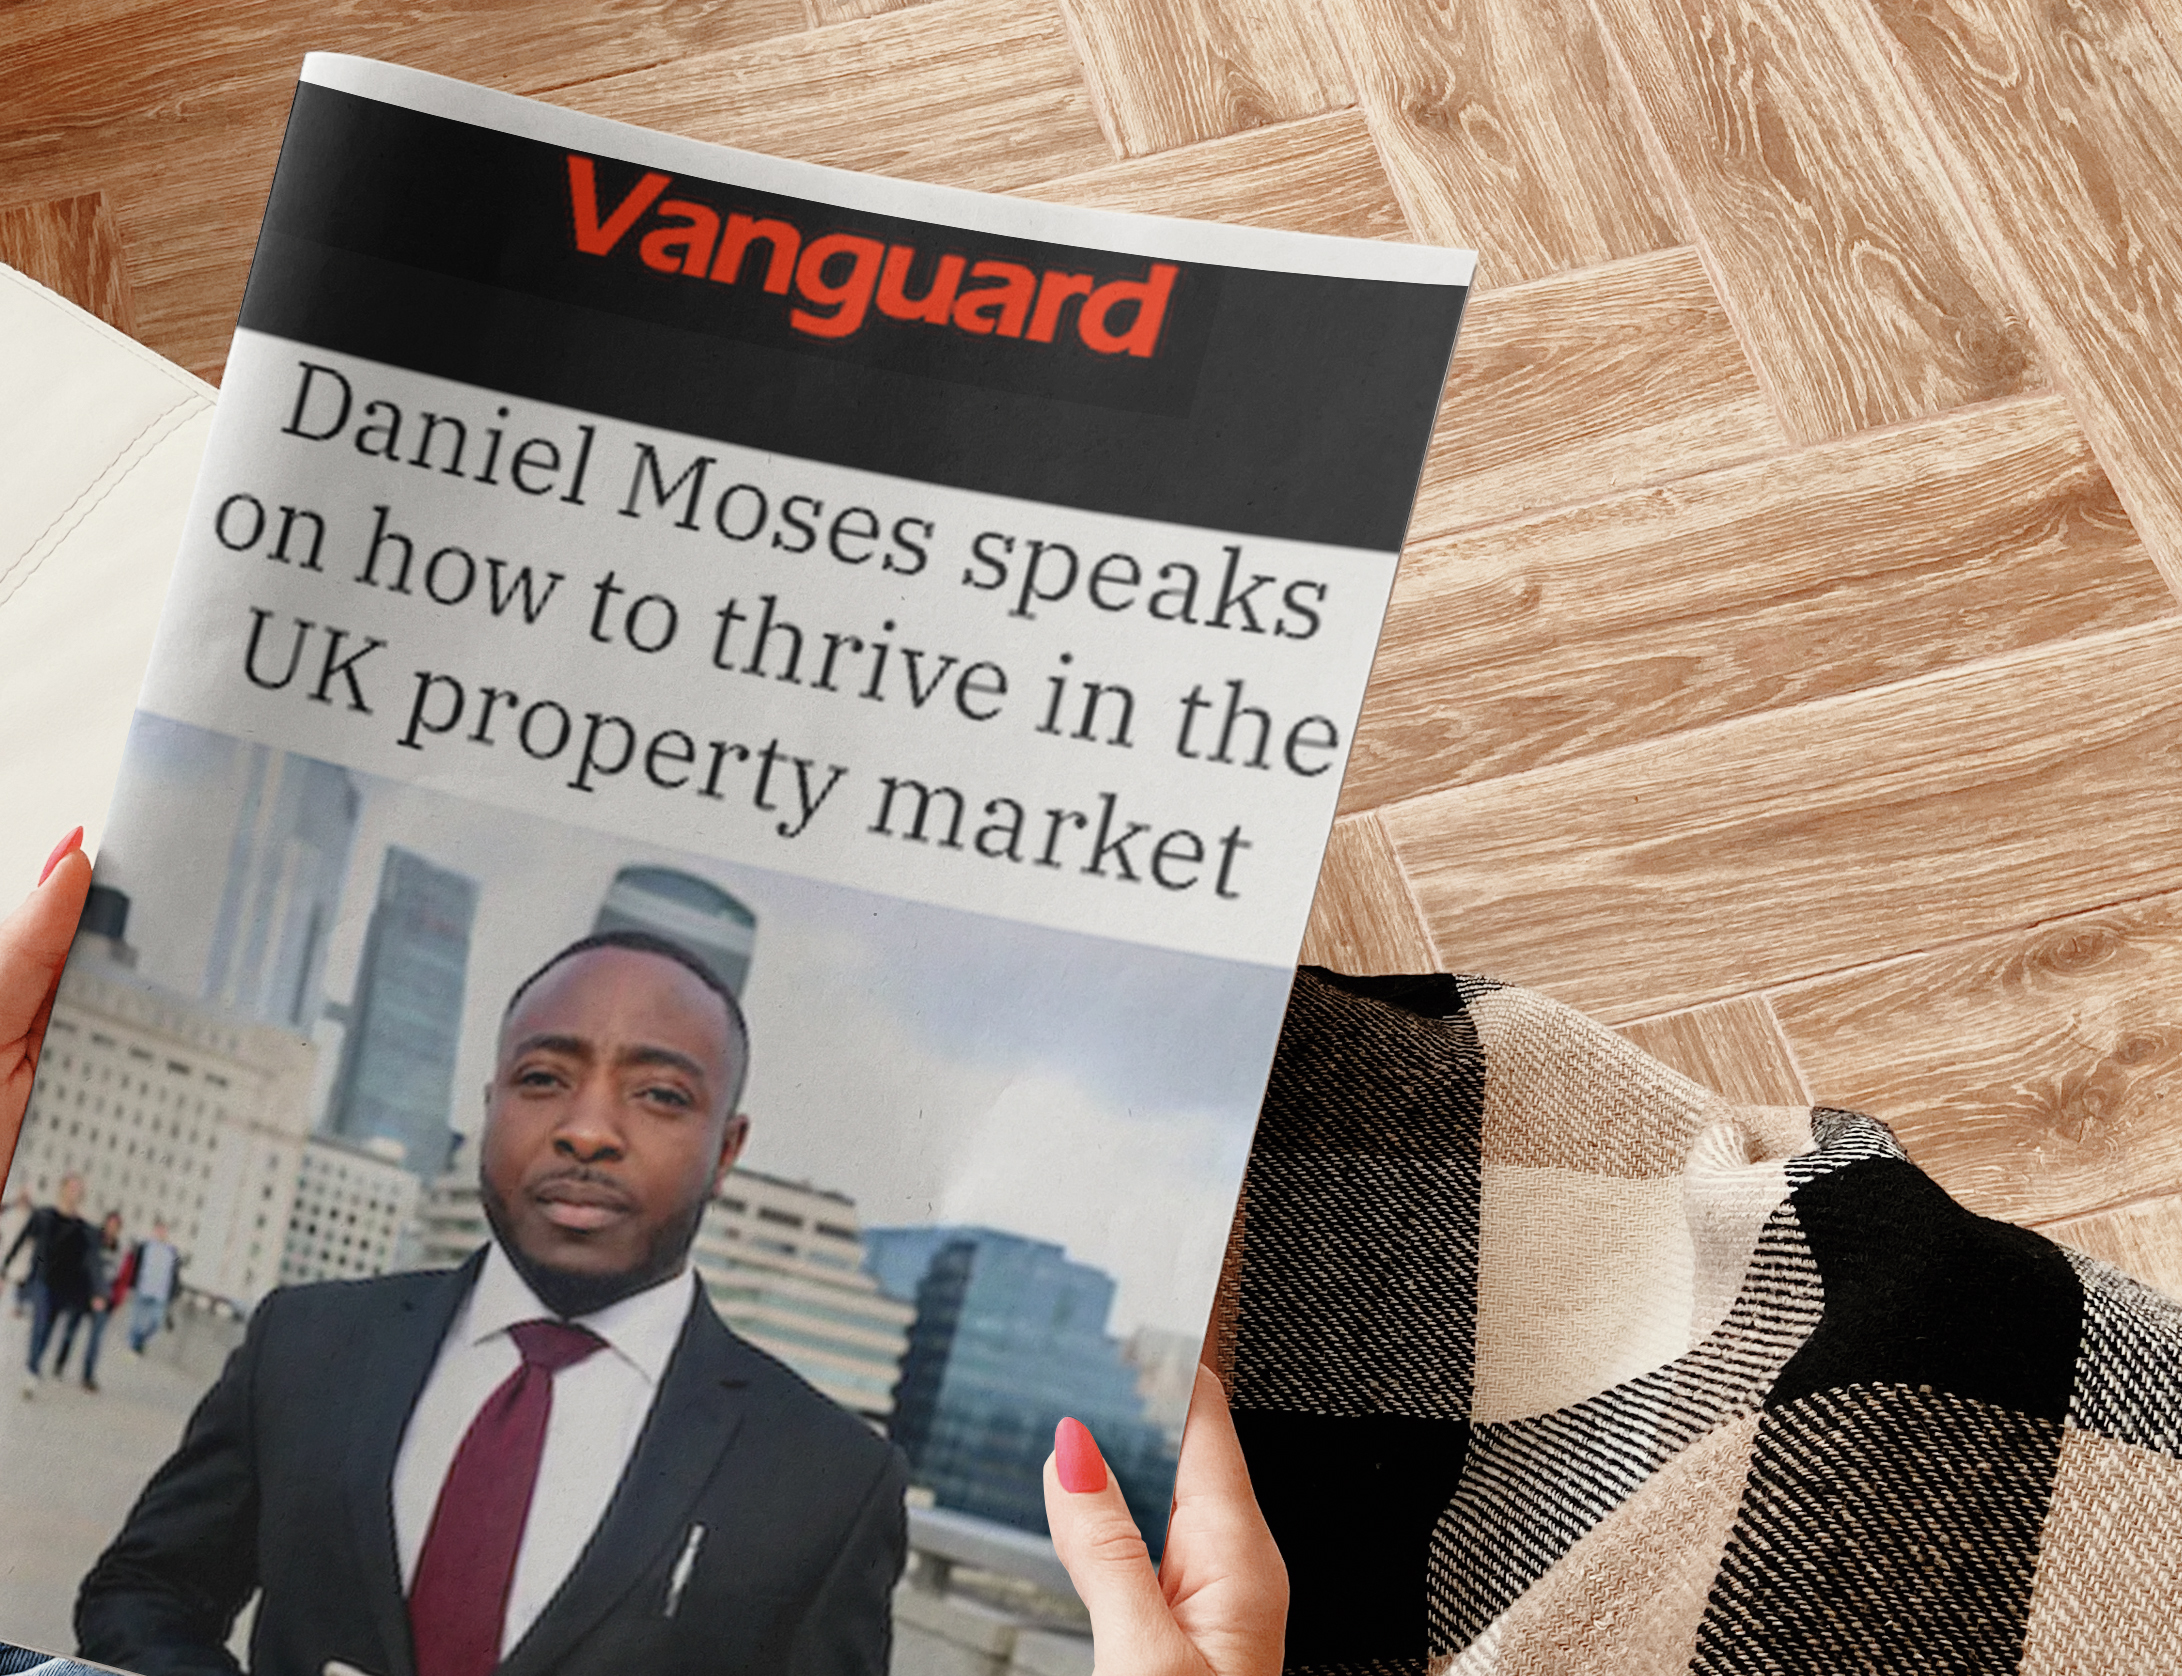 Daniel Moses speaks on how to thrive in the UK property market